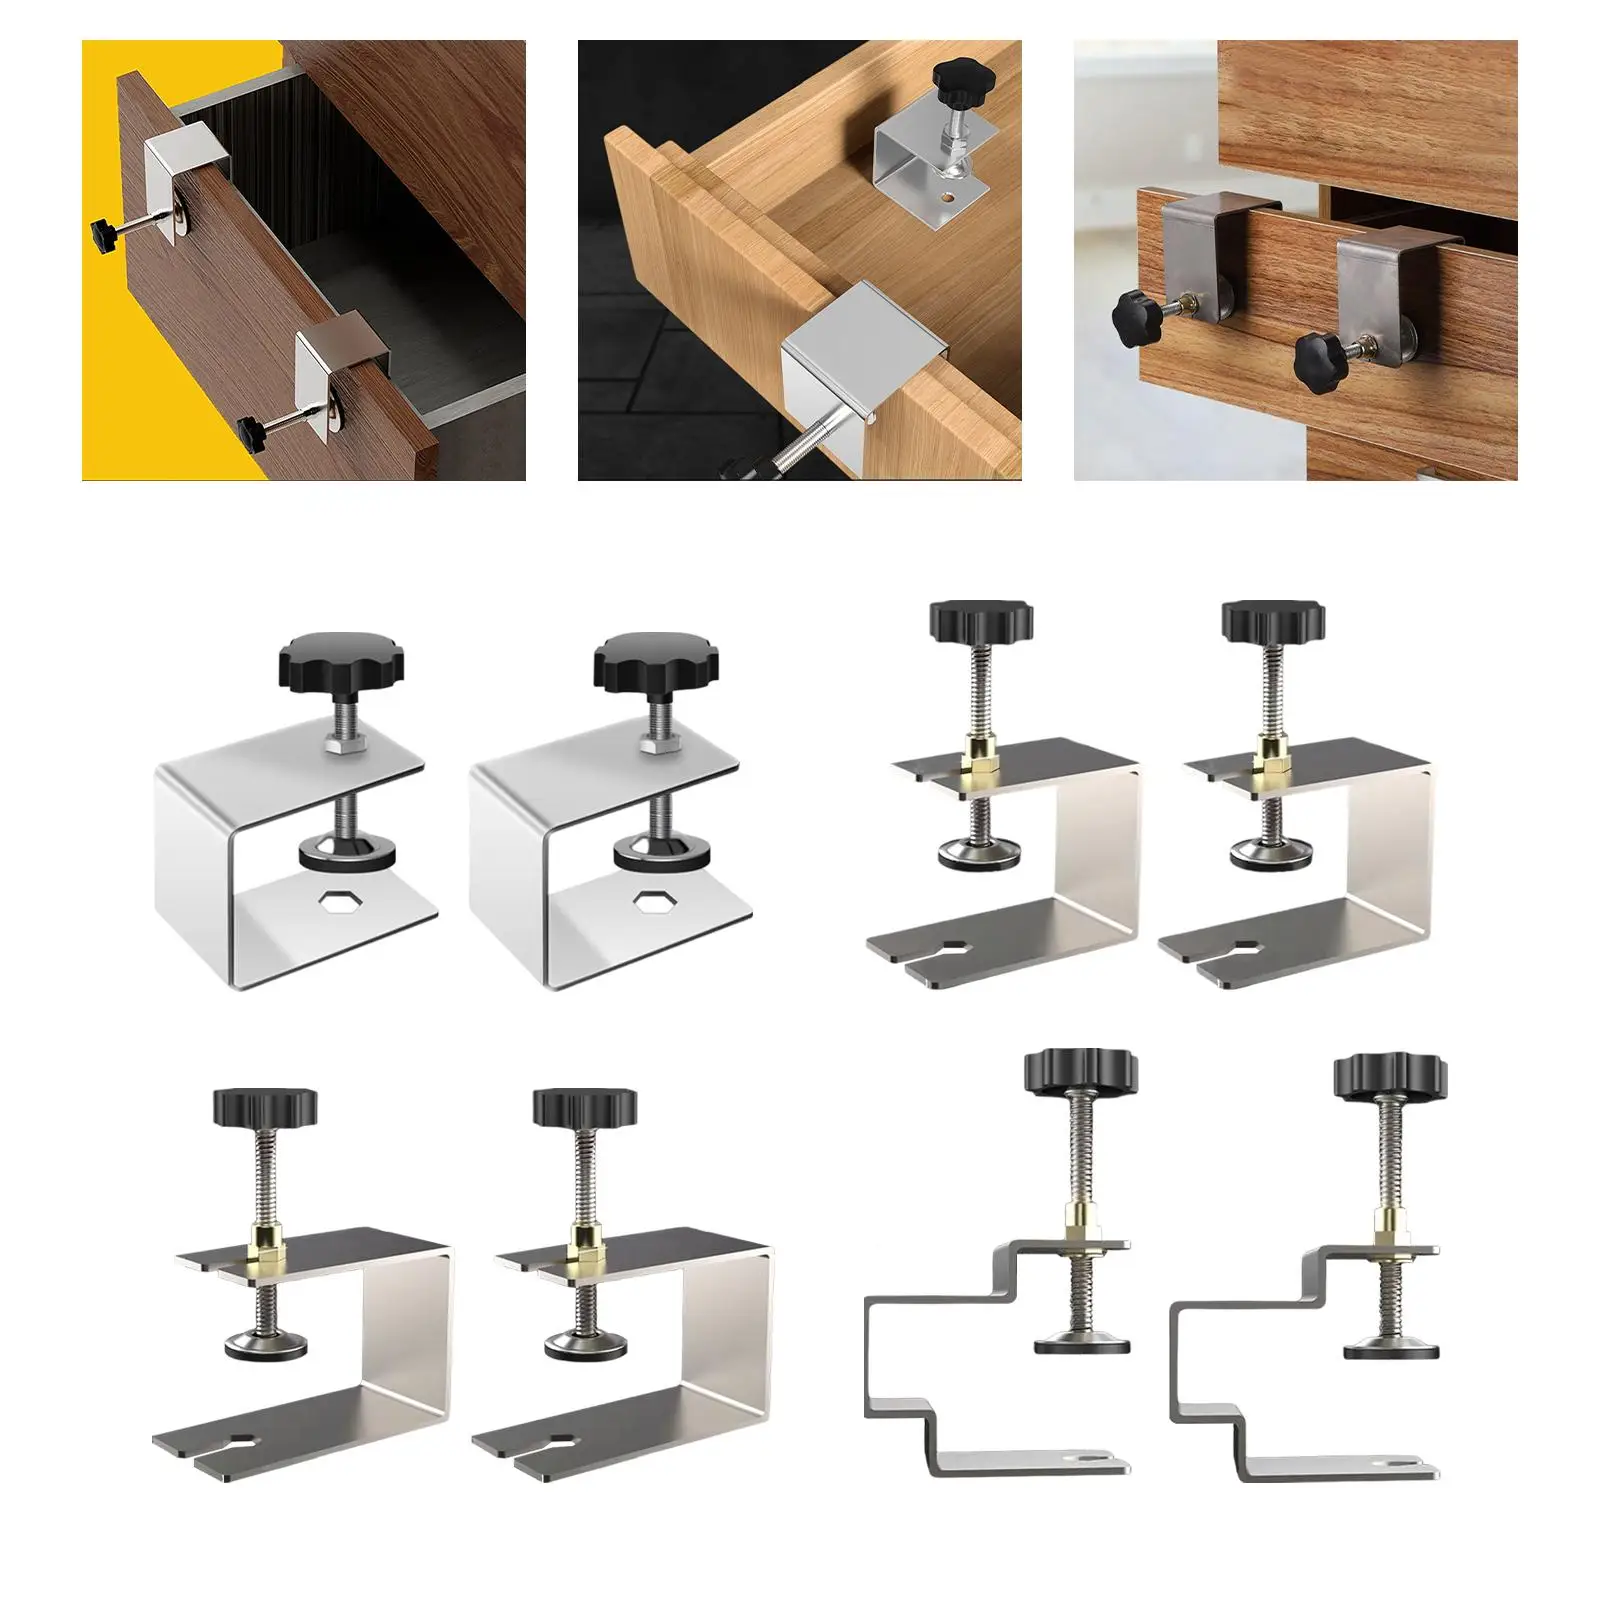 2Pcs Cabinet Drawer Front Installation Clamps, Stainless Steel Woodworking Clamps Tools Drawer Fast Installation